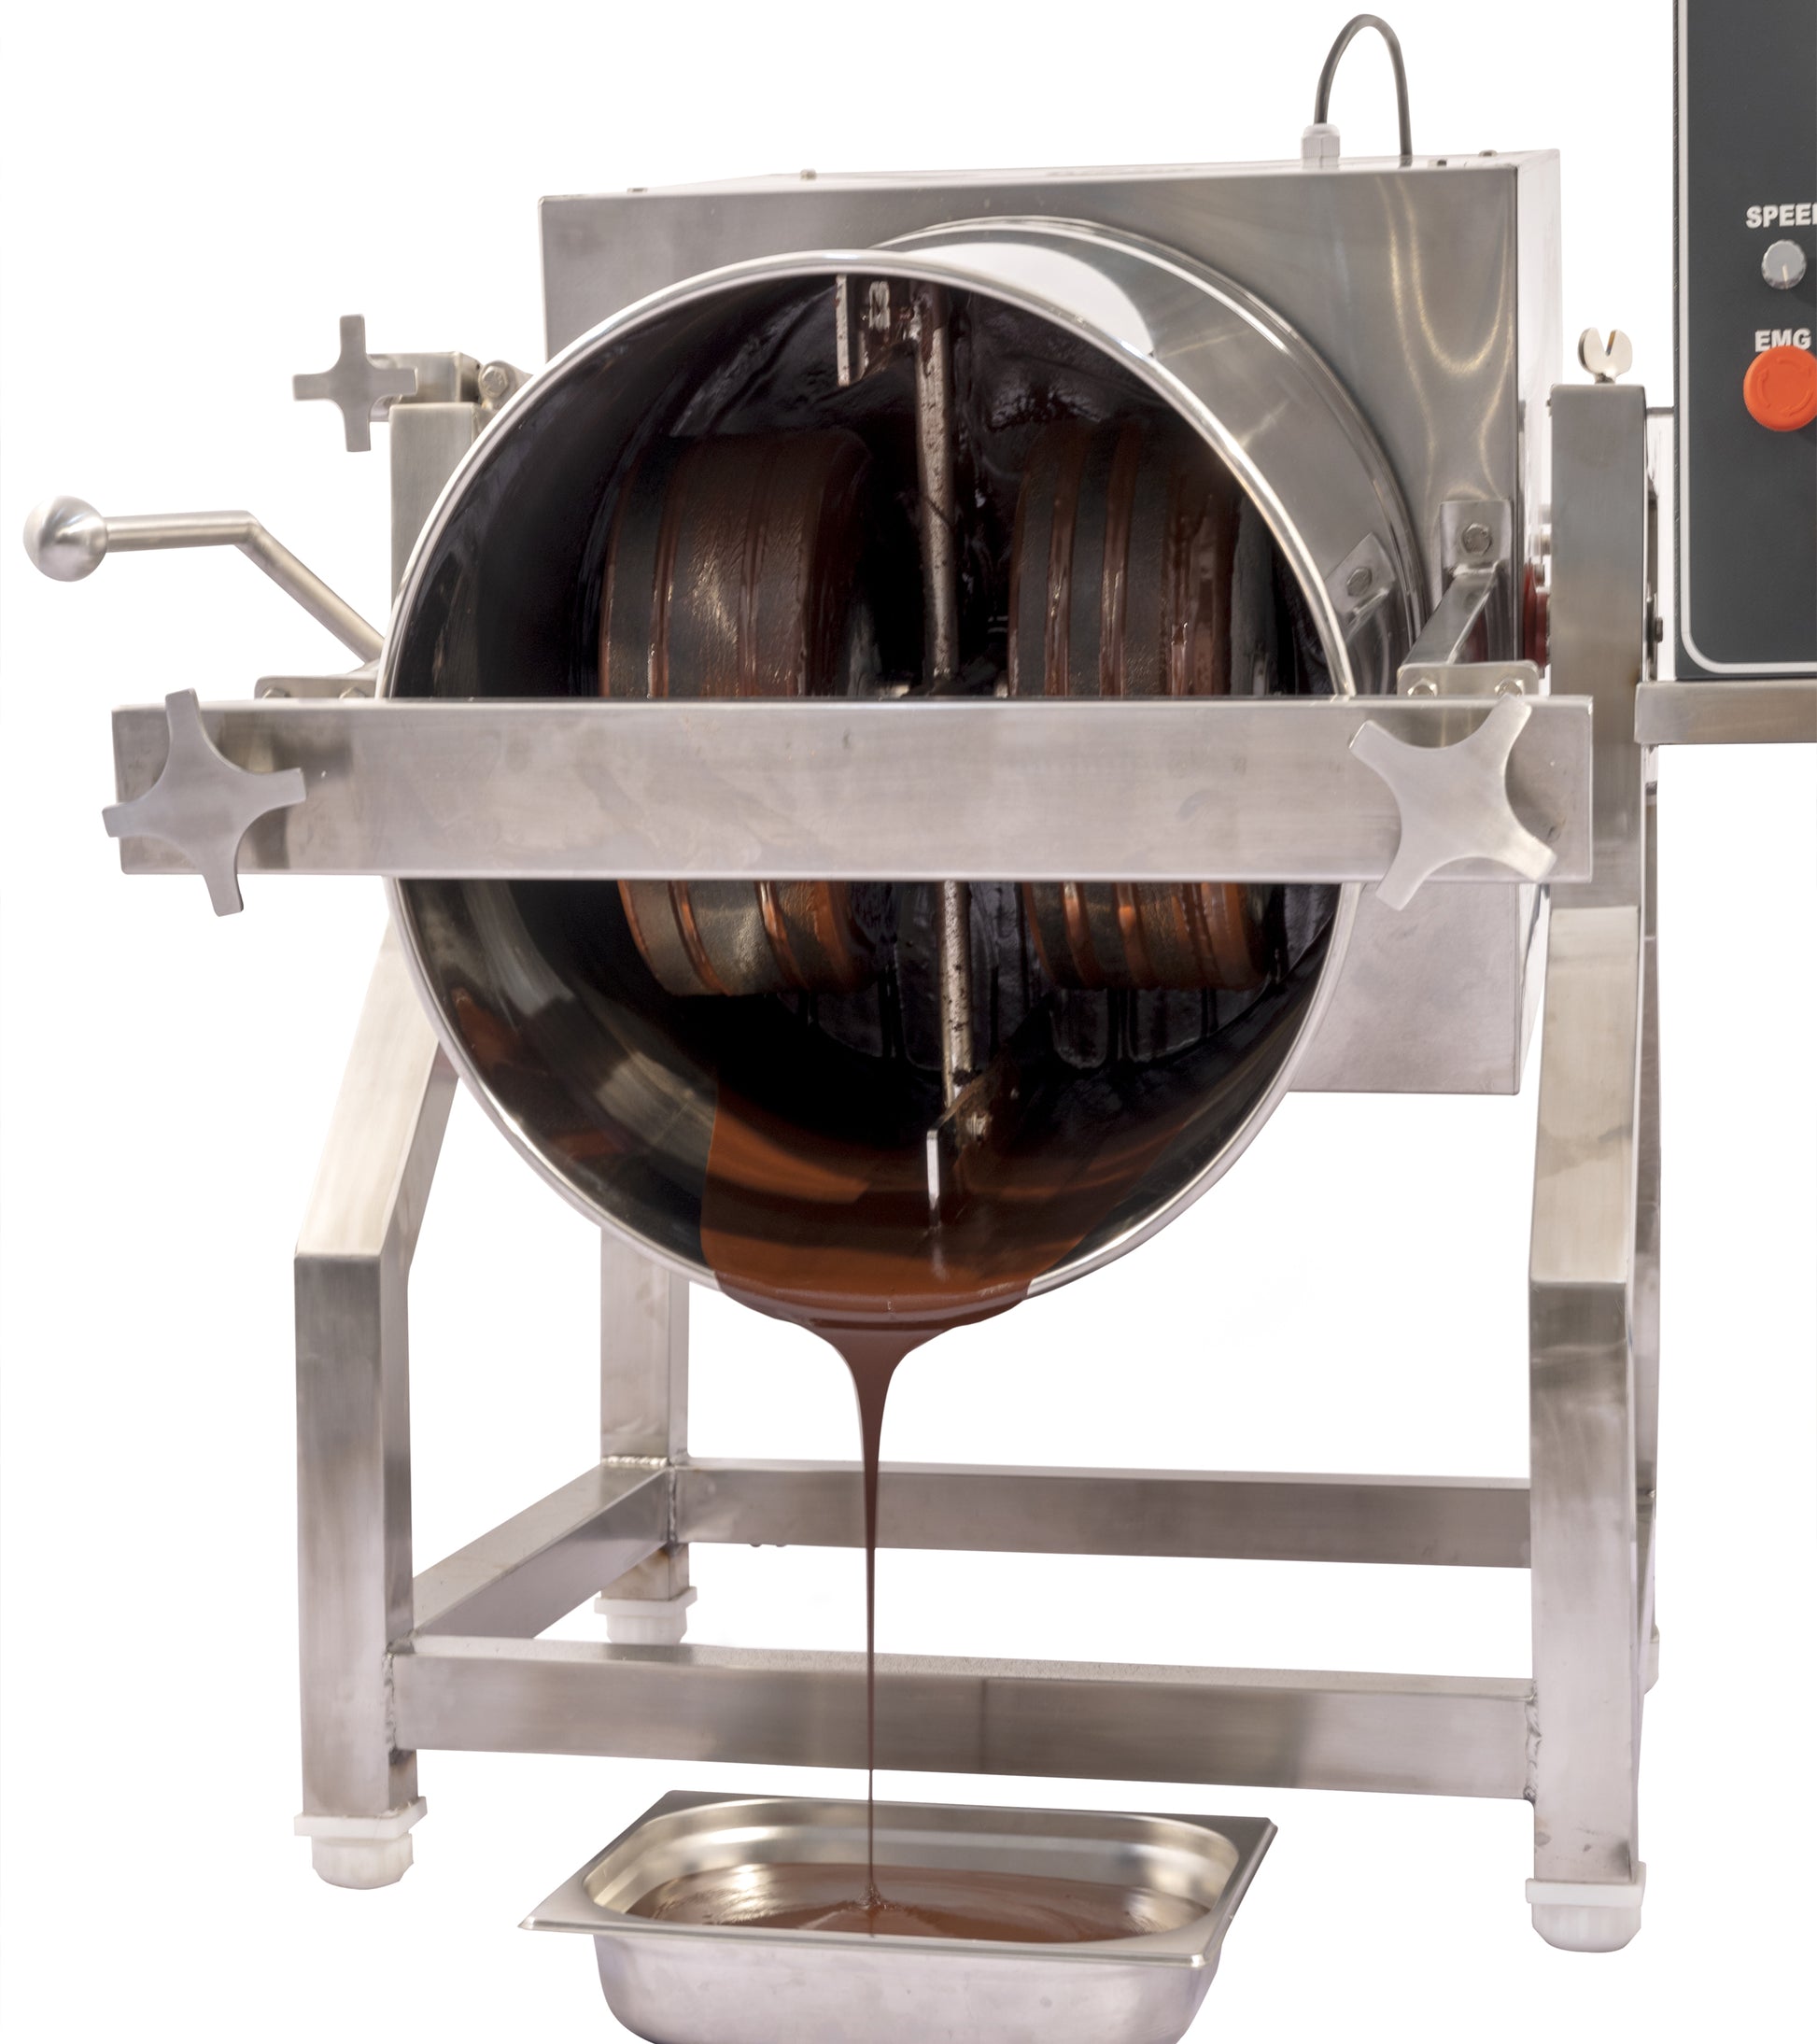 Cocoa 20 Chocolate Melangeur with Speed Controller